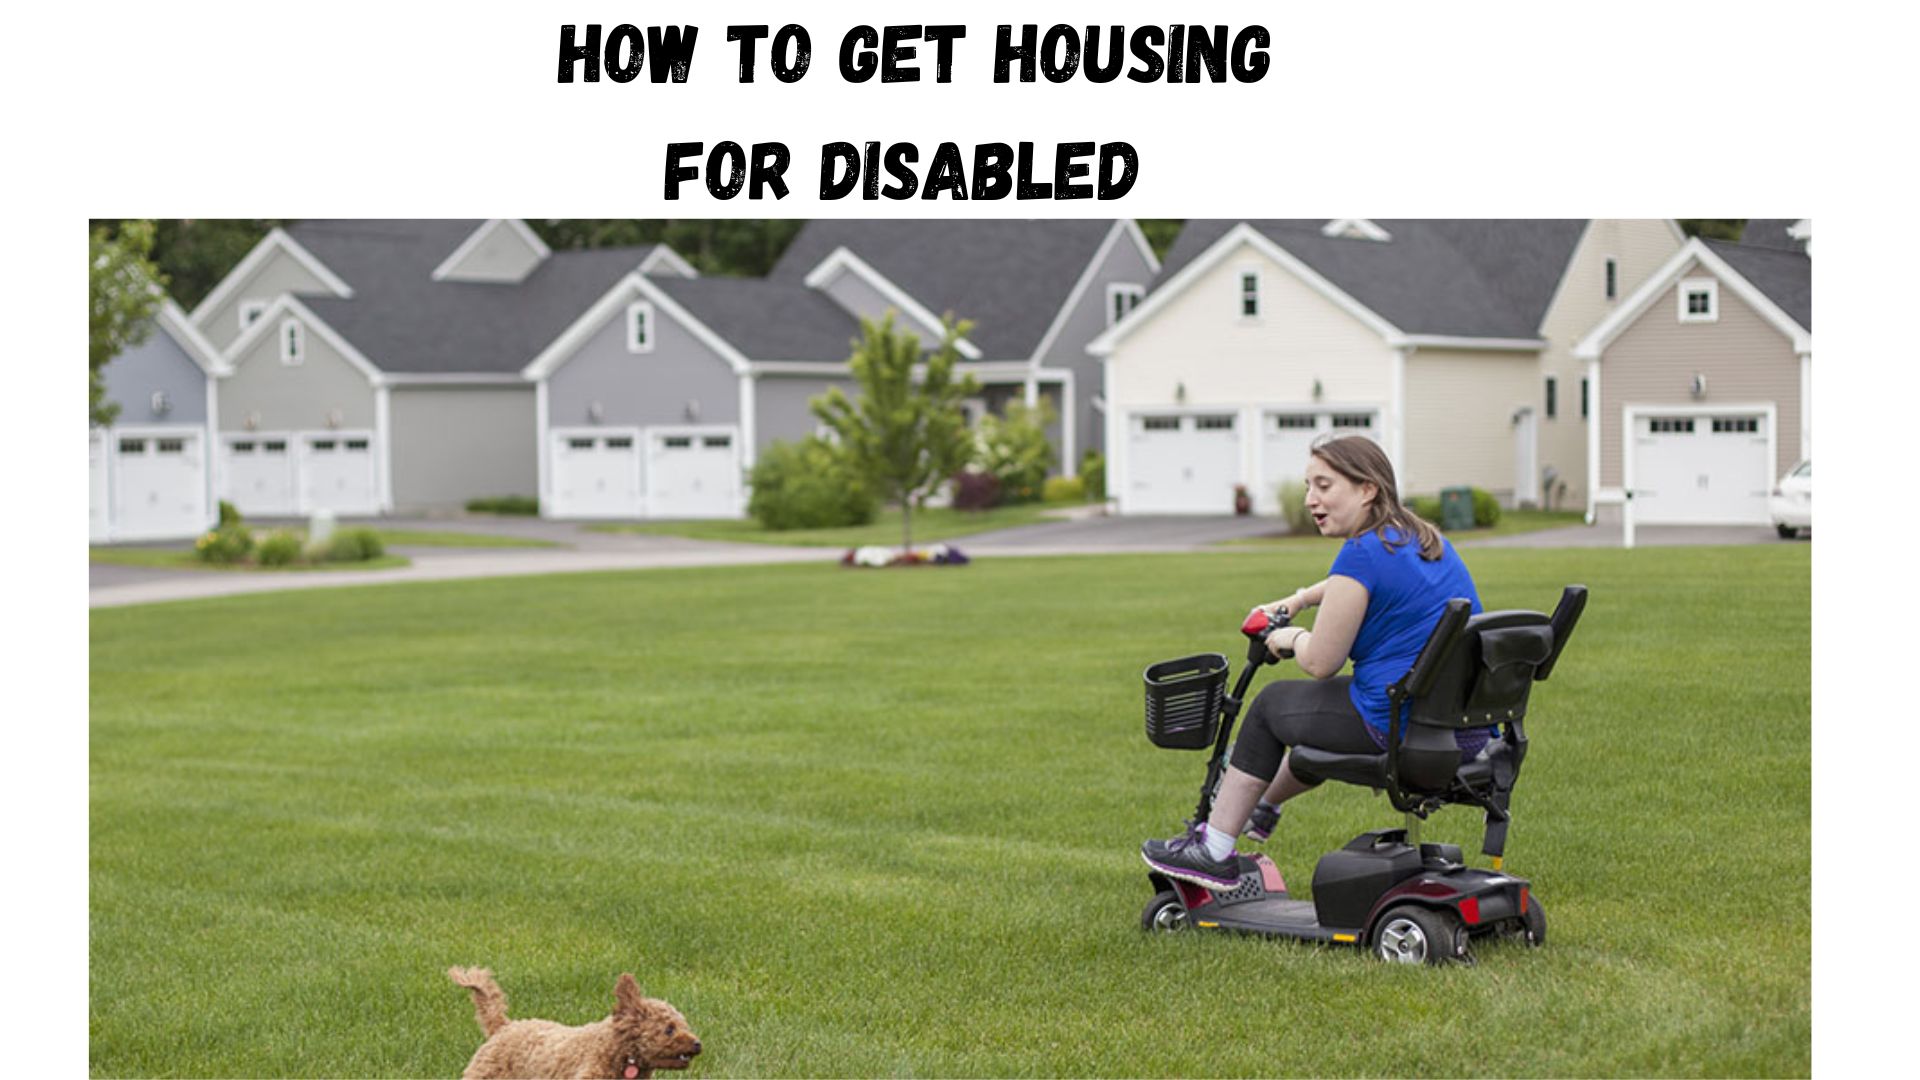 Get Housing for Disabled